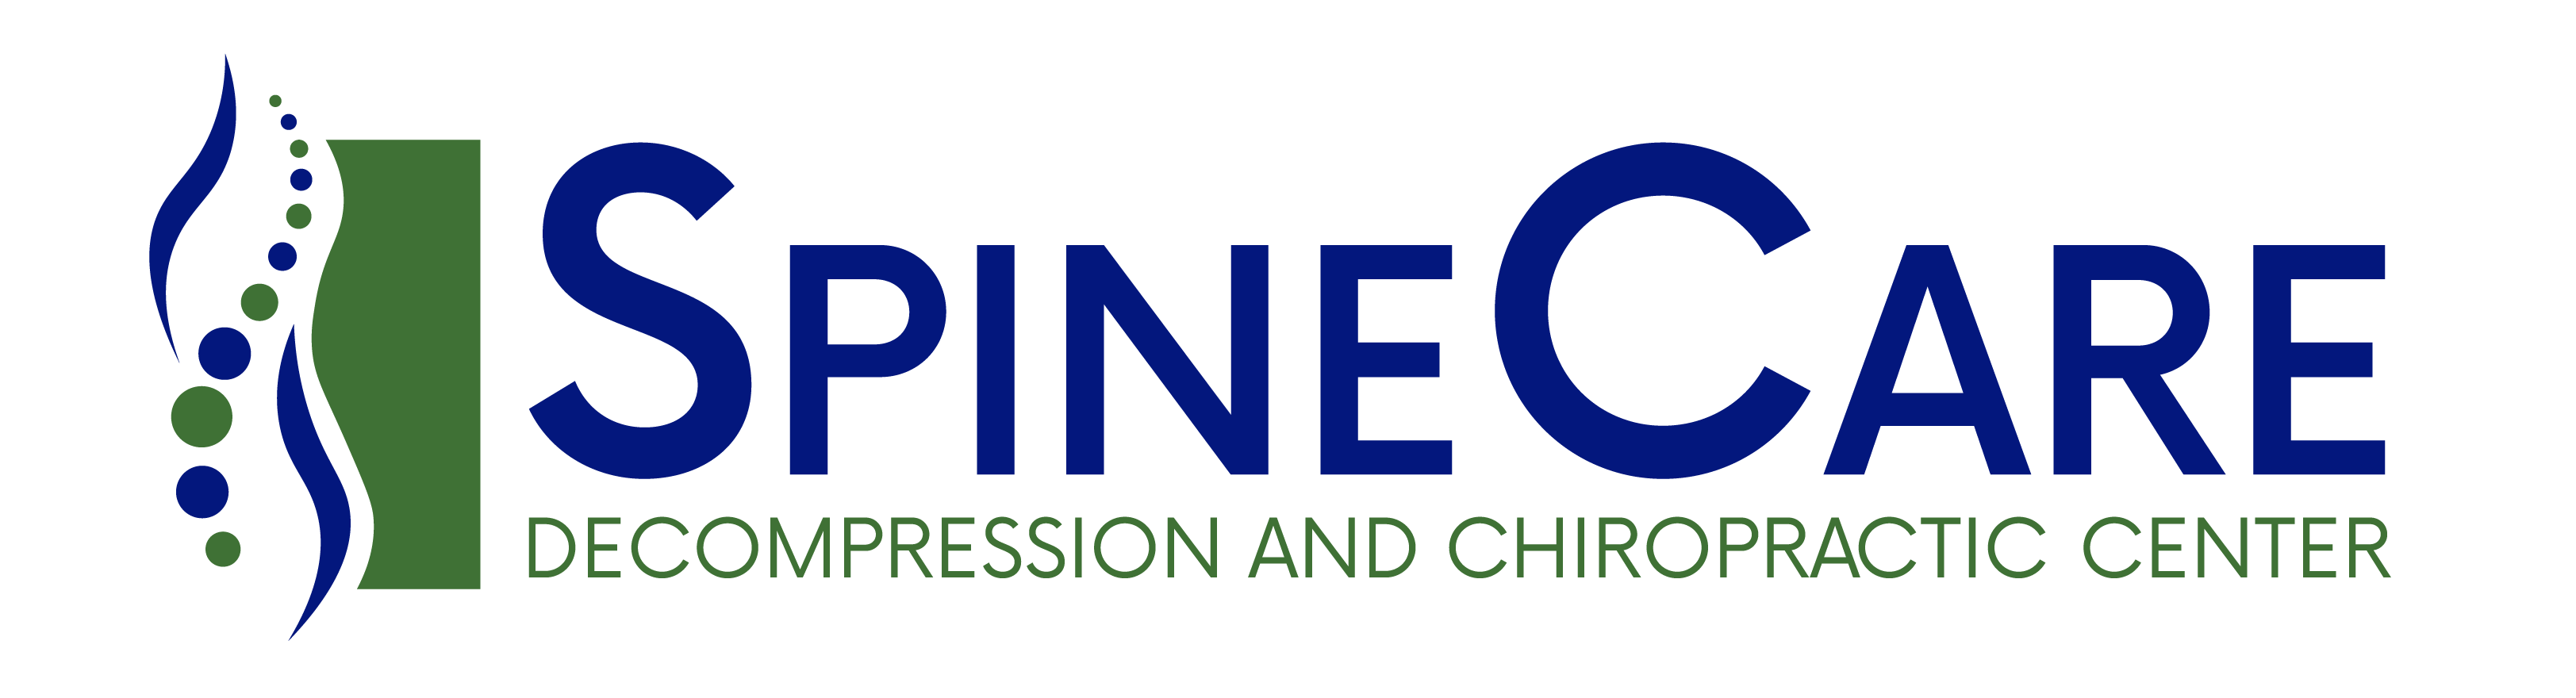 SpineCare Decompression and Chiropractic Center | St. Joseph, MI Chiropractor